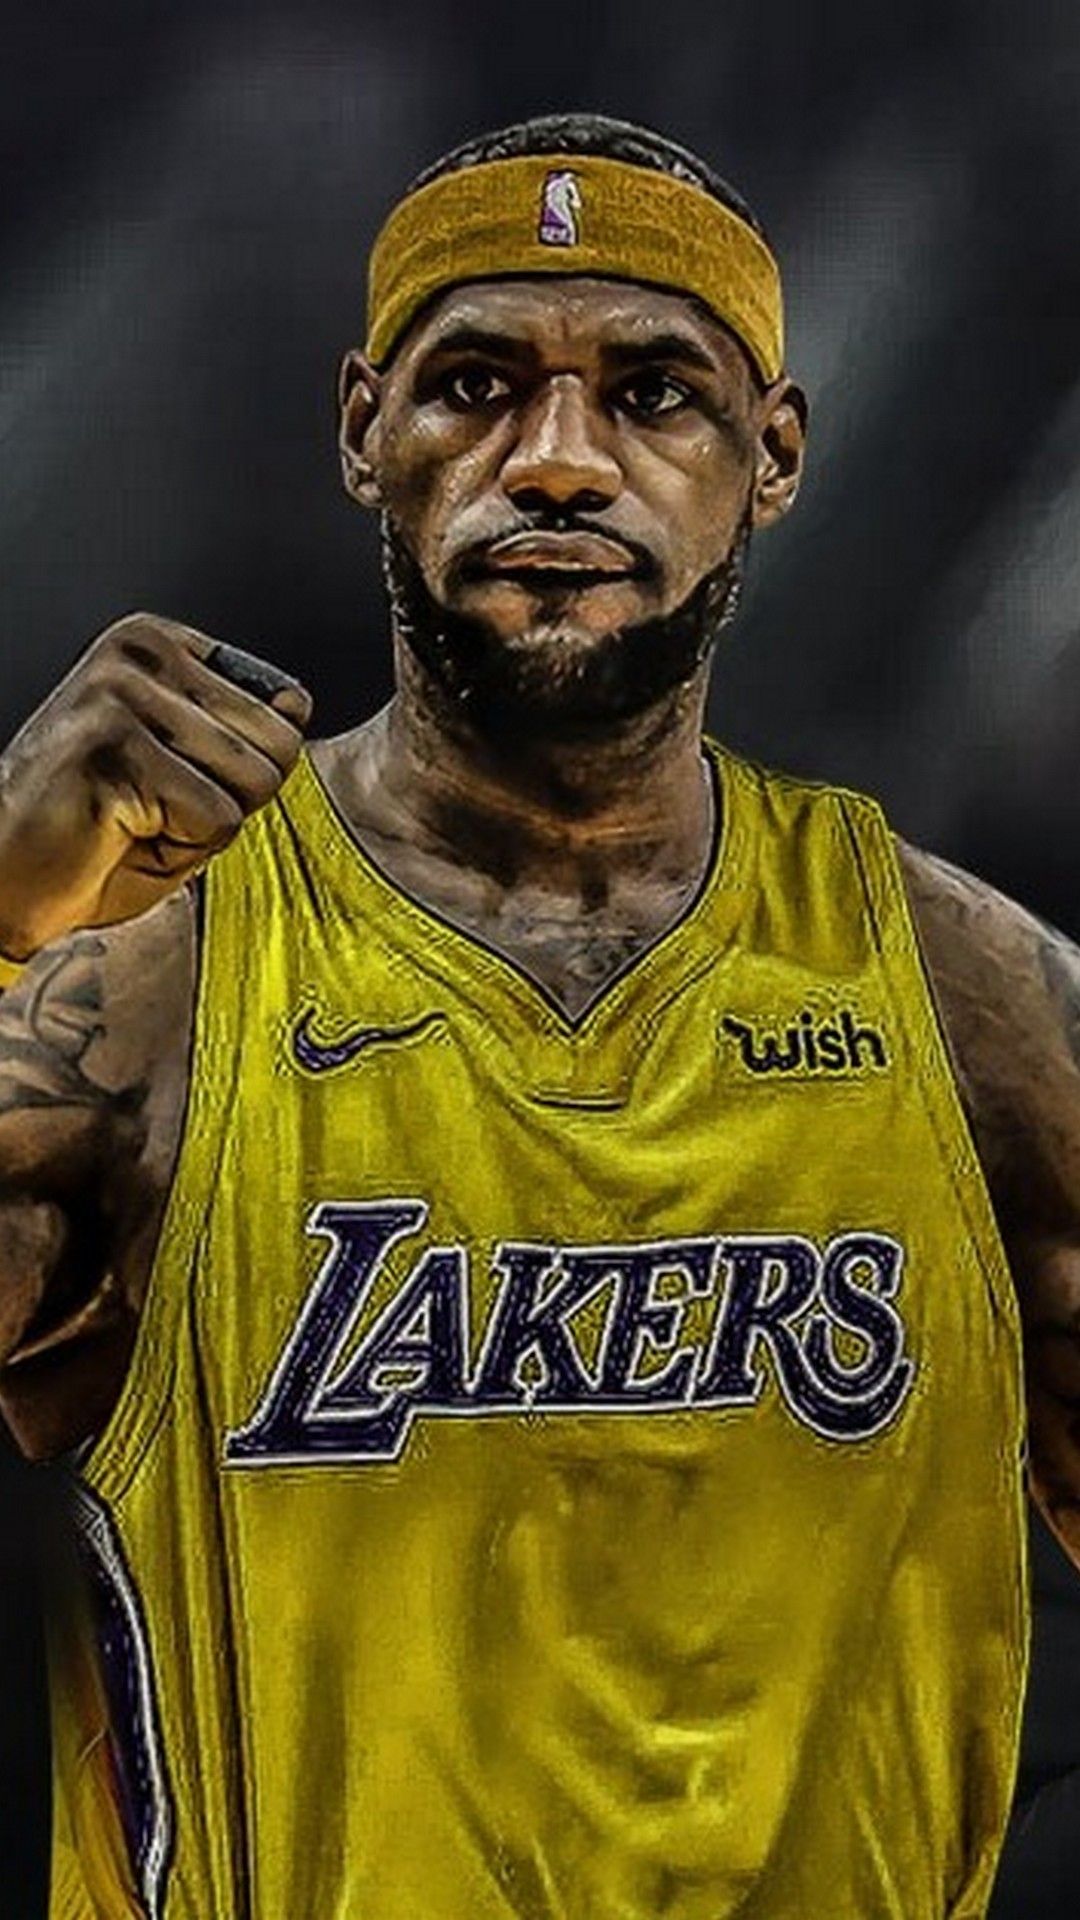 IPhone Wallpaper Lebron James Lakers with high-resolution 1080x1920 pixel. You can use this wallpaper for your iPhone 5, 6, 7, 8, X, XS, XR backgrounds, Mobile Screensaver, or iPad Lock Screen - Lebron James